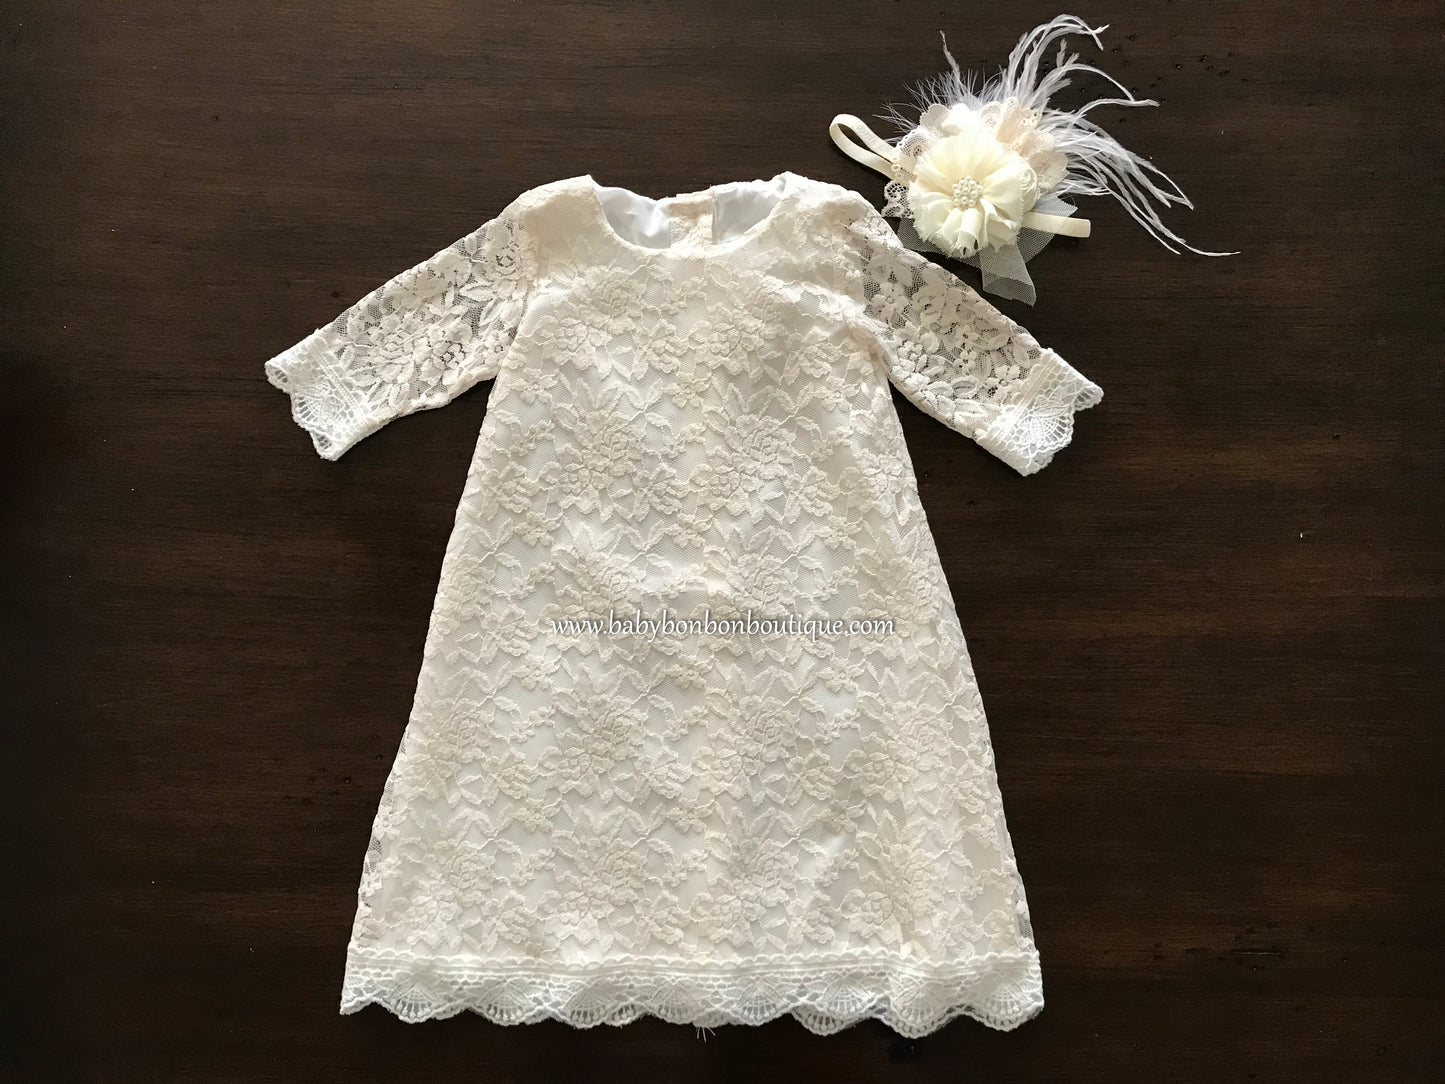 Baby Girl Lace Christening Dress with Headband, Bell Baptism Lace Dress